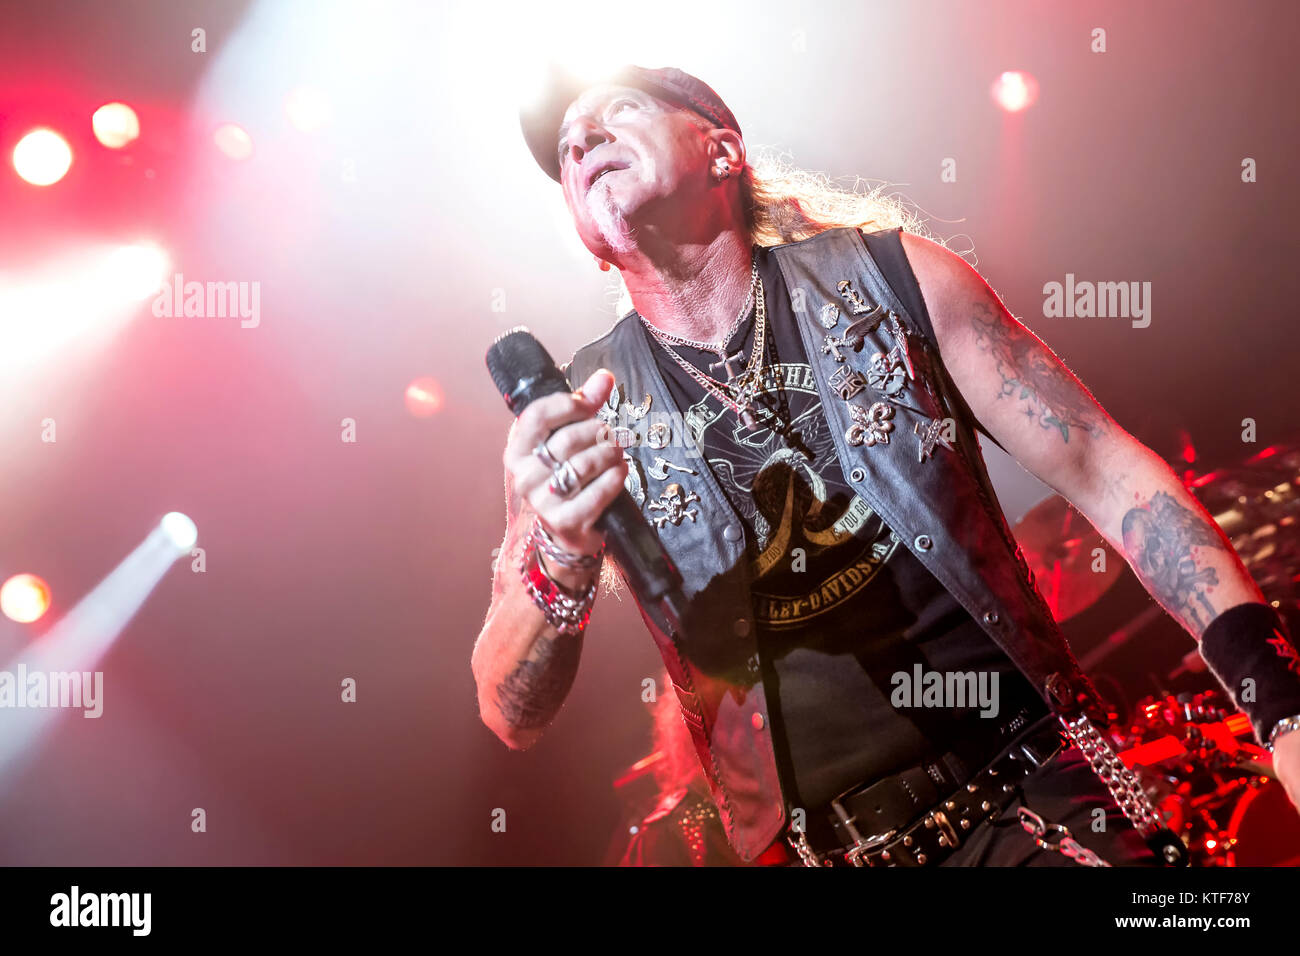 The German heavy metal band Accept performs a live concert at Rockefeller in Oslo. Here vocalist Mark Tornillo is seen live on stage. Norway, 01/10 2014. Stock Photo